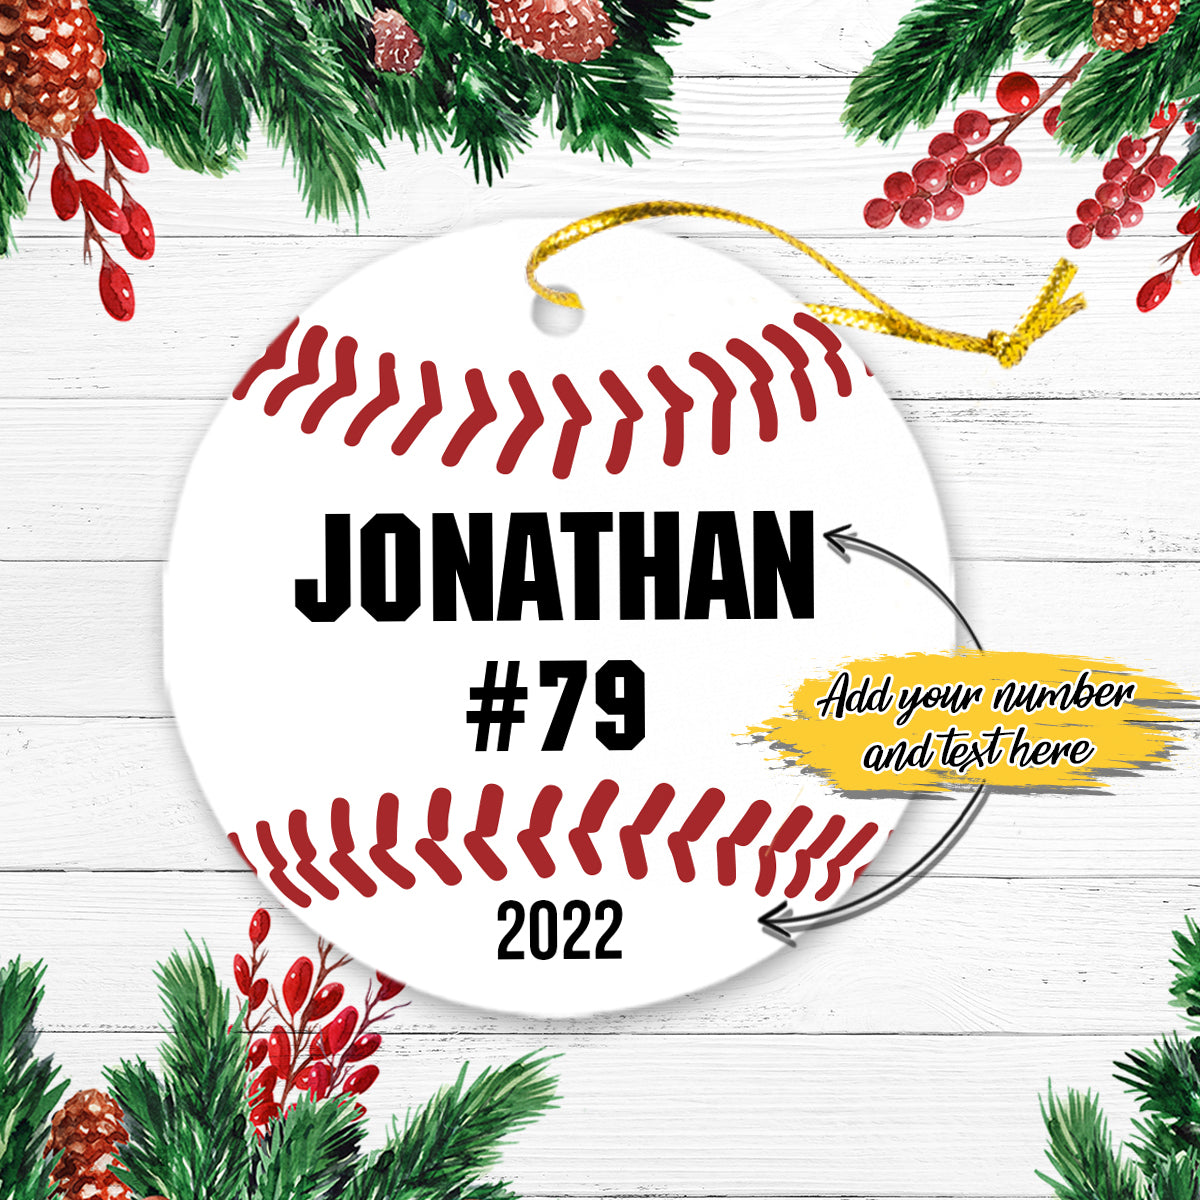 Products Baseball Sports Personalized Christmas Premium Ceramic Ornaments Sets for Christmas Tree